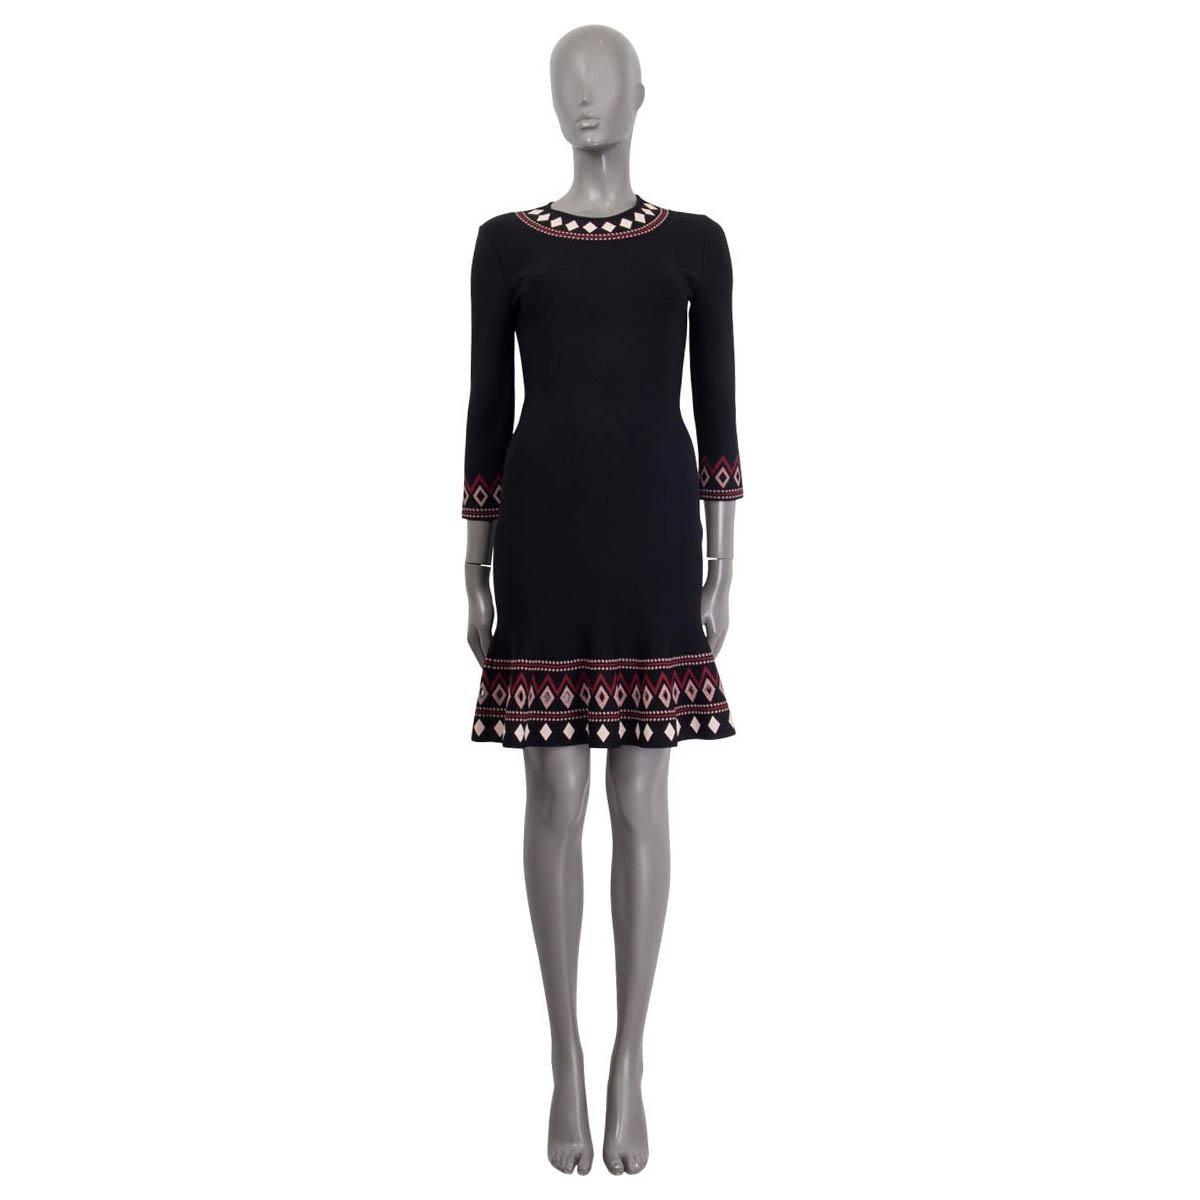 100% authentic Alexander McQueen geometric flared jacquard knit dress in black, dusty rose and burgundy viscose (76%), polyester (16%), polyamide (6%) and elastane (2% - please note the content tag is missing). Features a geometric print at round